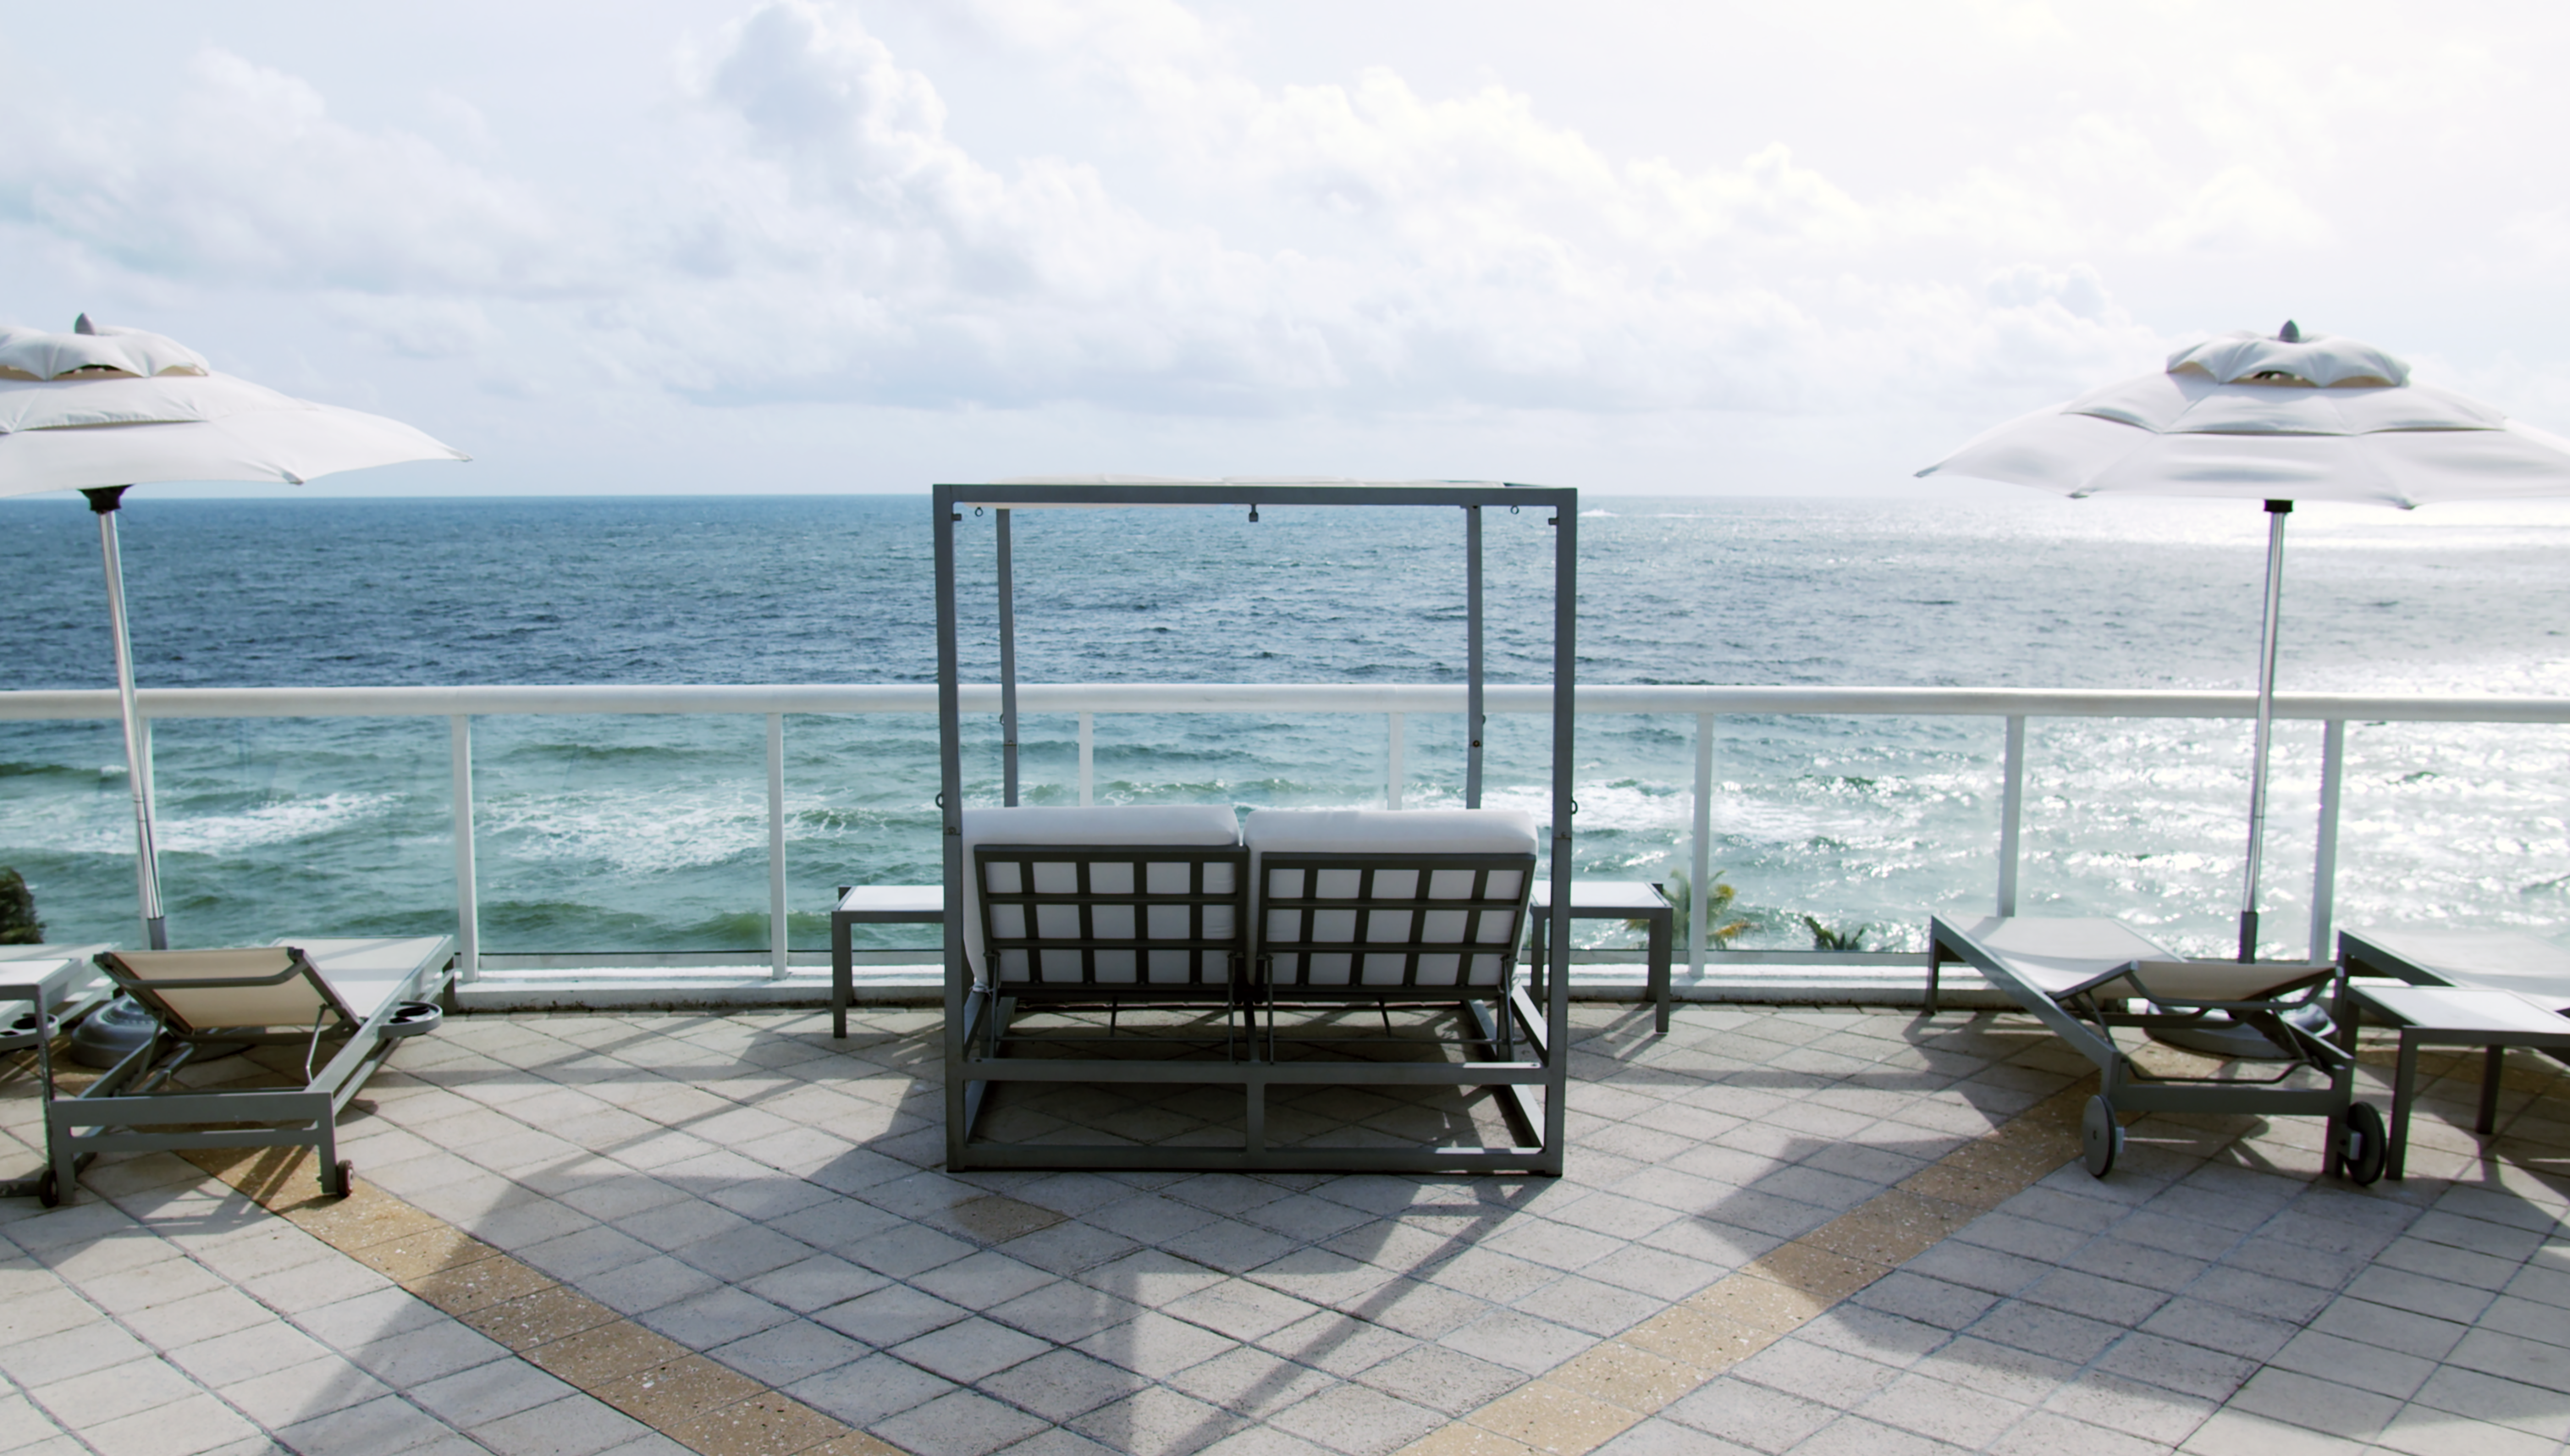 Seating Area on a Terrace with Sea View